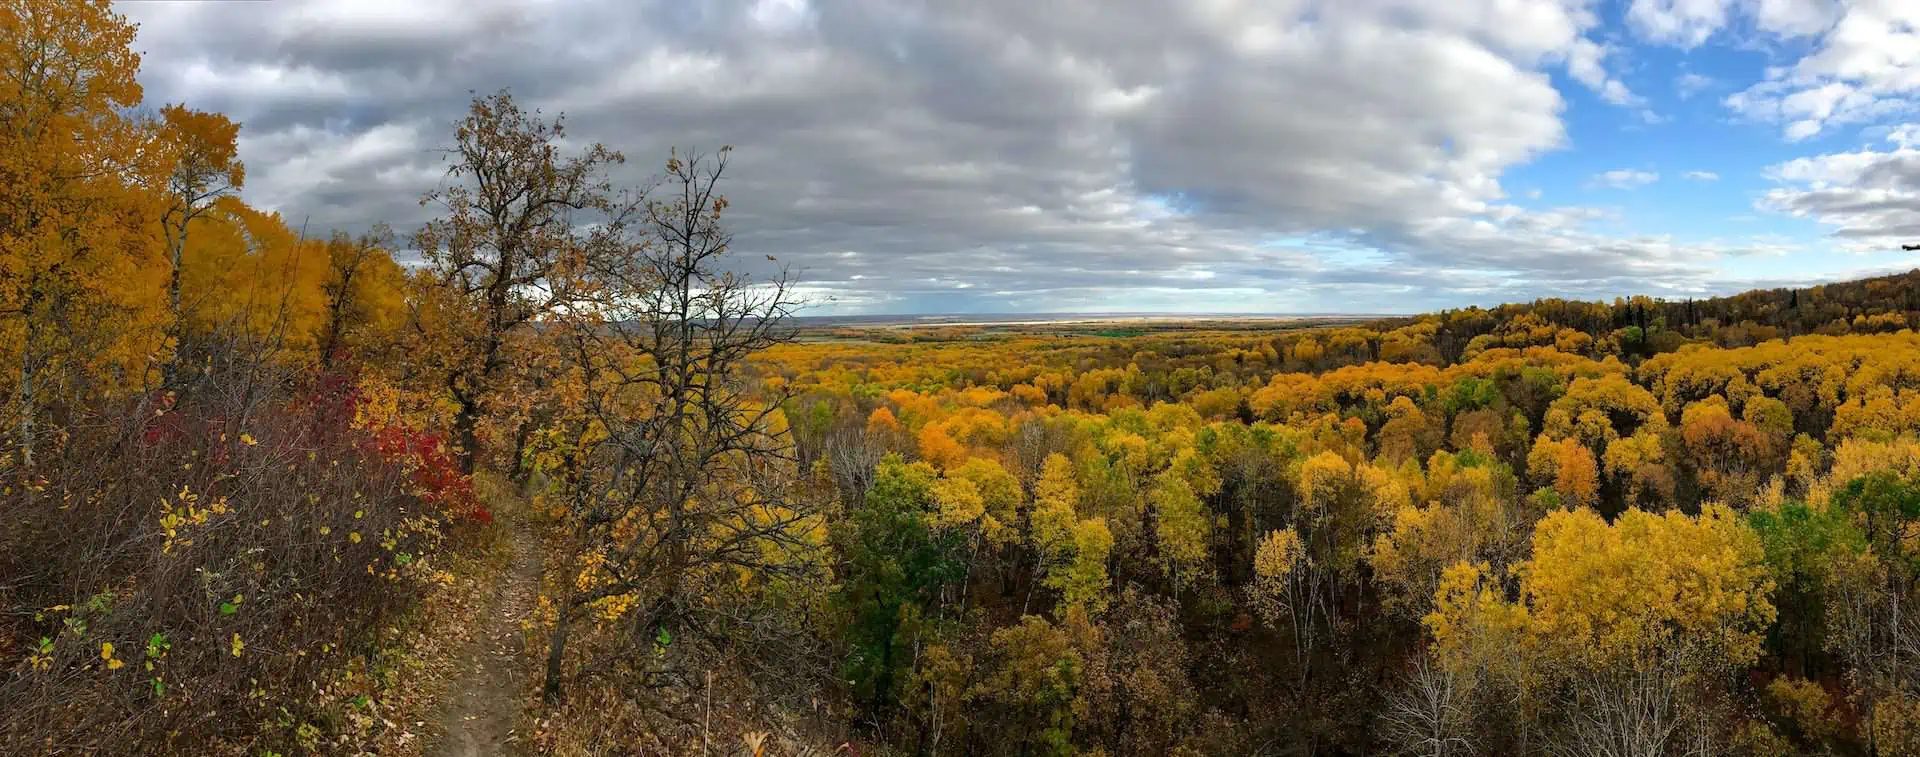 Fall foliage and trees at Riding Mountain National Park, MB, Canada